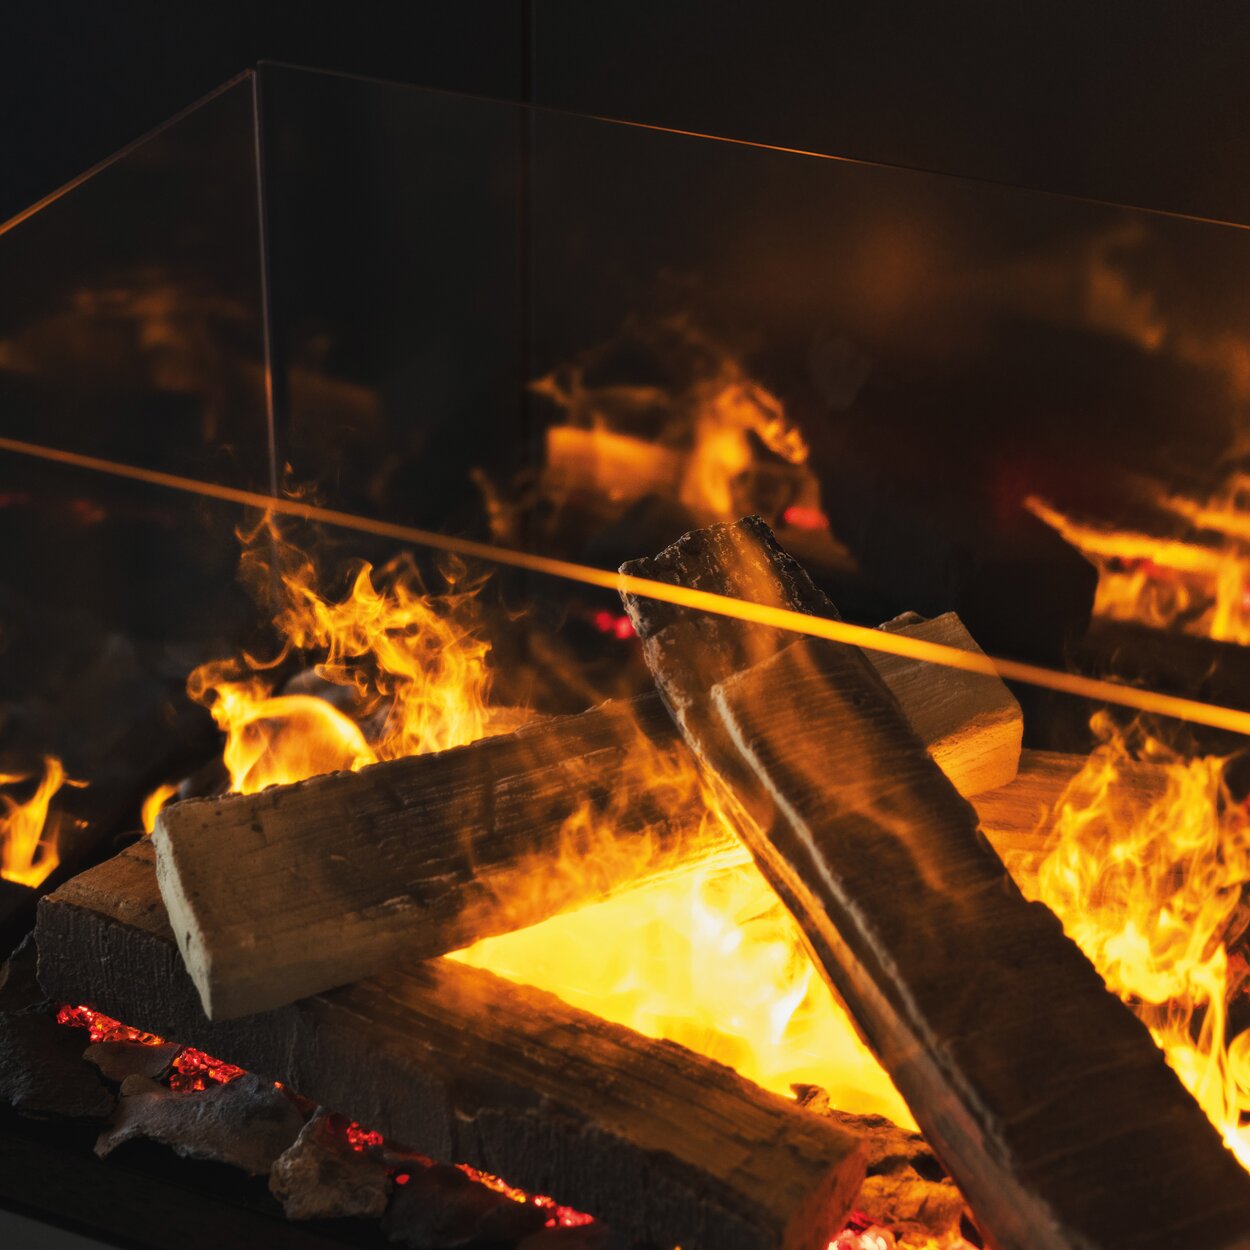 With the eSENSE electric fire, the water vapour flames are illuminated with LEDs.